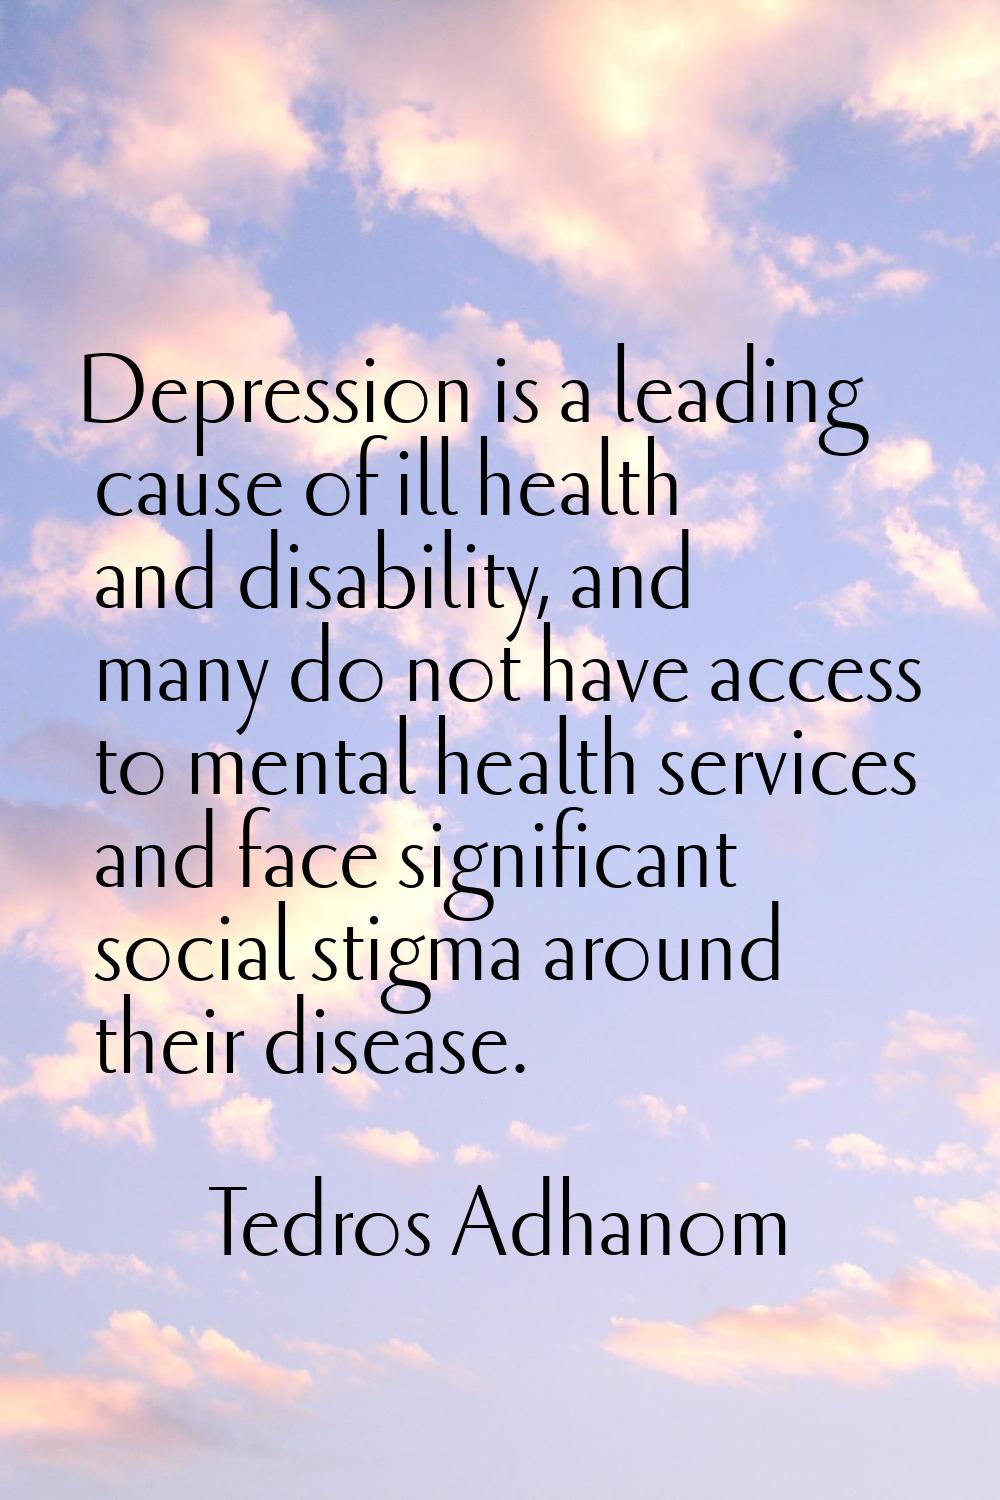 Depression is a leading cause of ill health and disability, and many do not have access to mental h